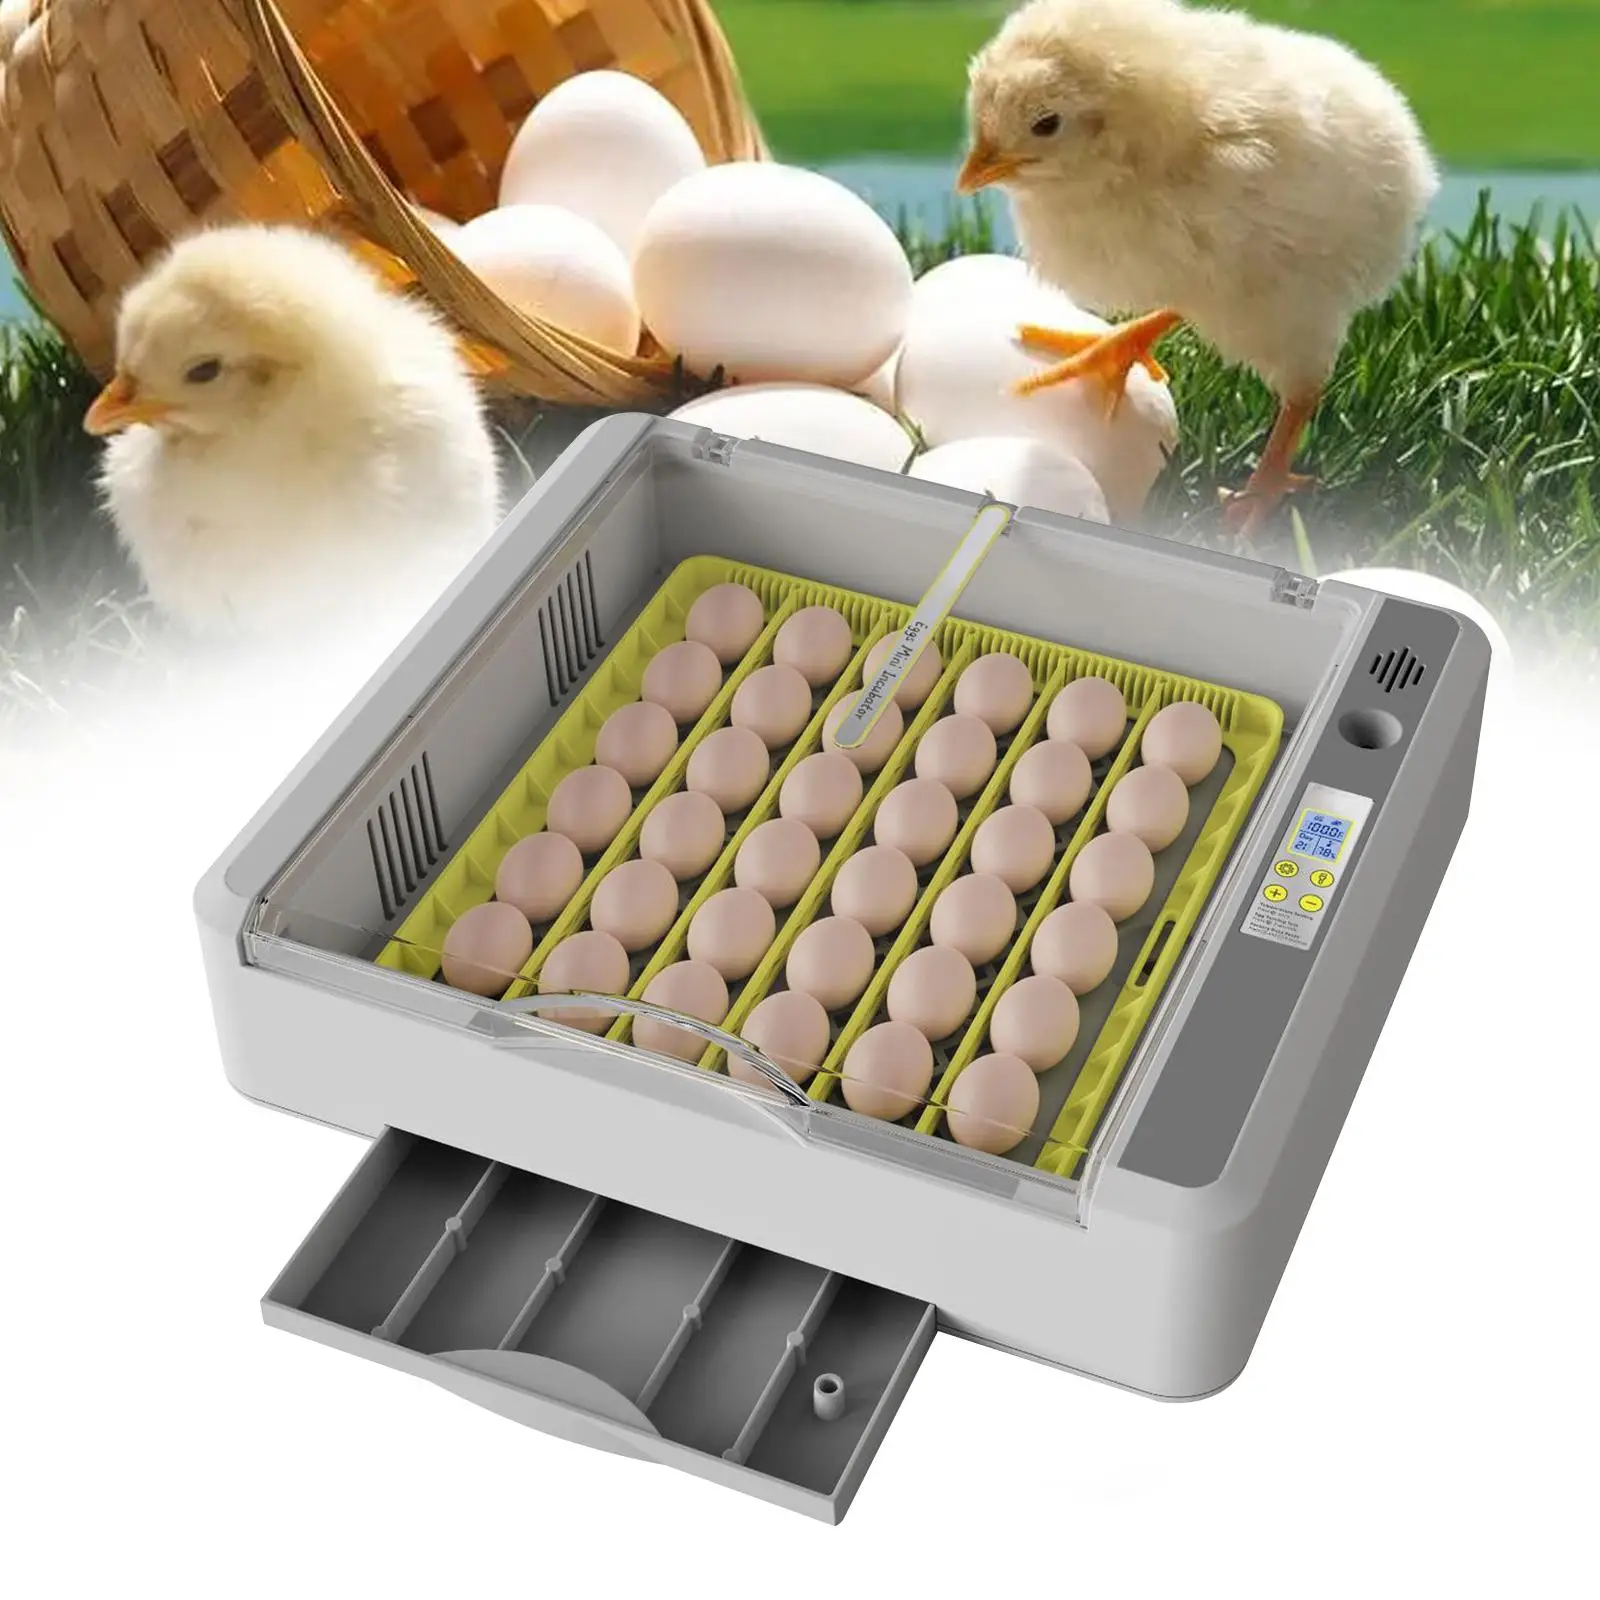 

36 Egg Incubator Lightweight Durable Multipurpose with Automatic Egg Turning Hatching Machine for Birds Pigeon Duck Quail Turkey